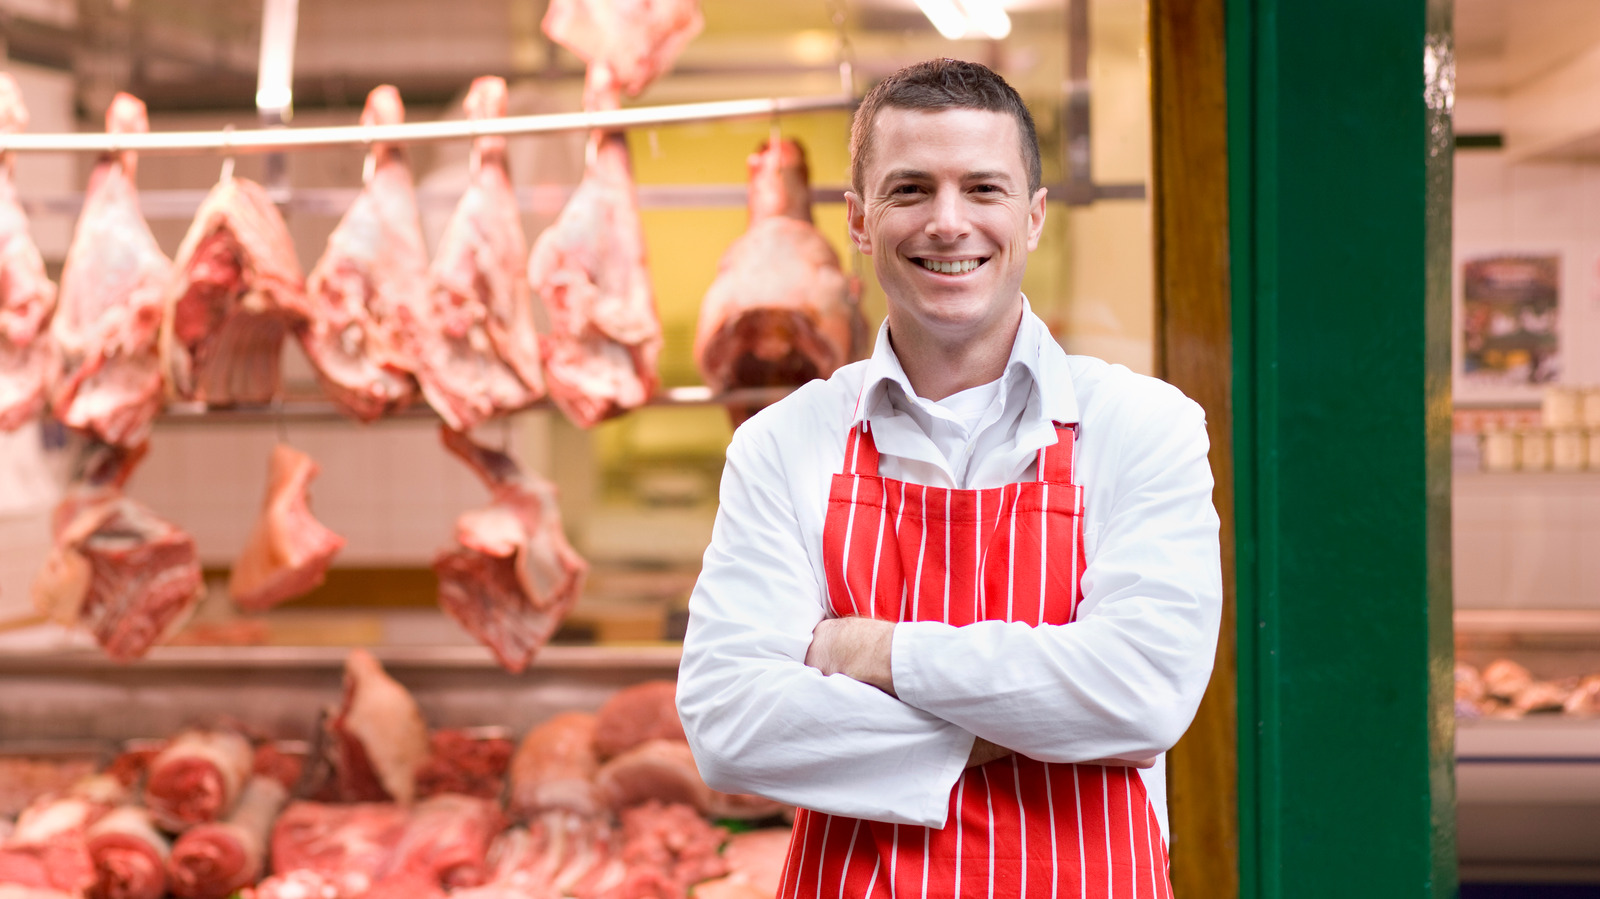 Reasons to Buy Meat From Your Local Butcher